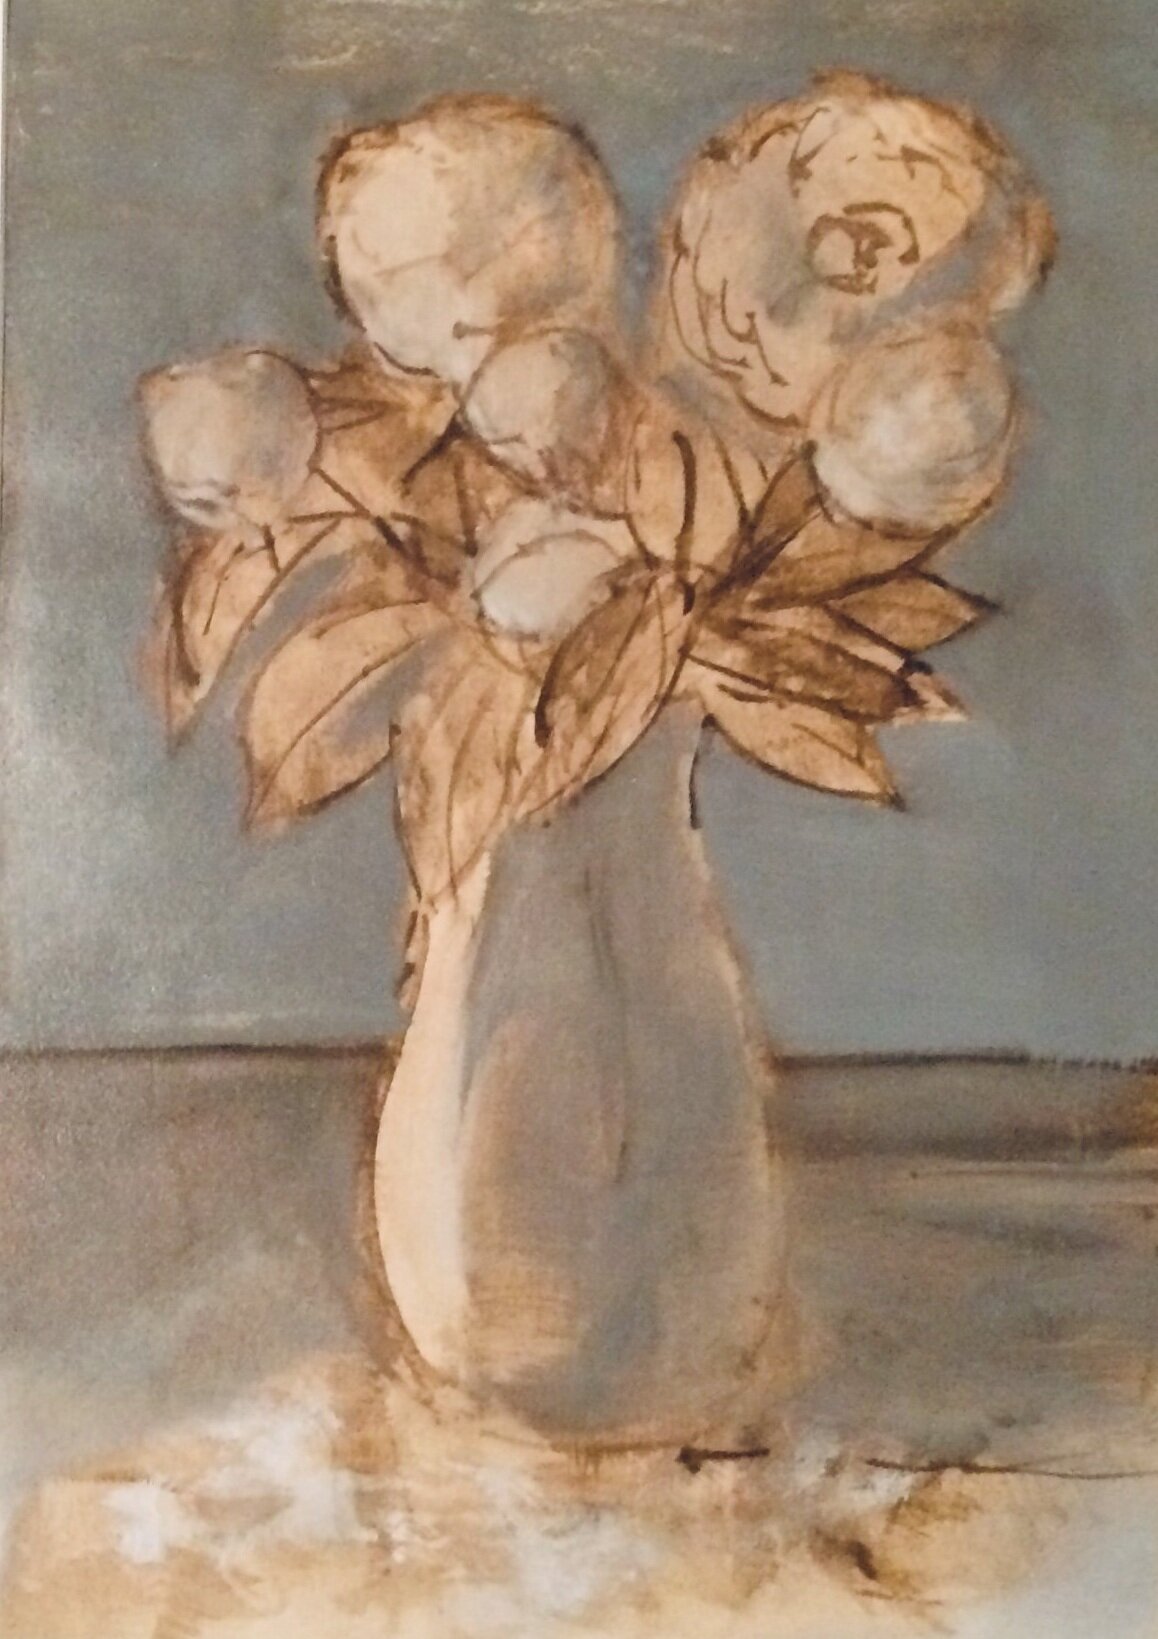 Peonies with Petals, Oil on Paper, 18x24 inches, 2020.